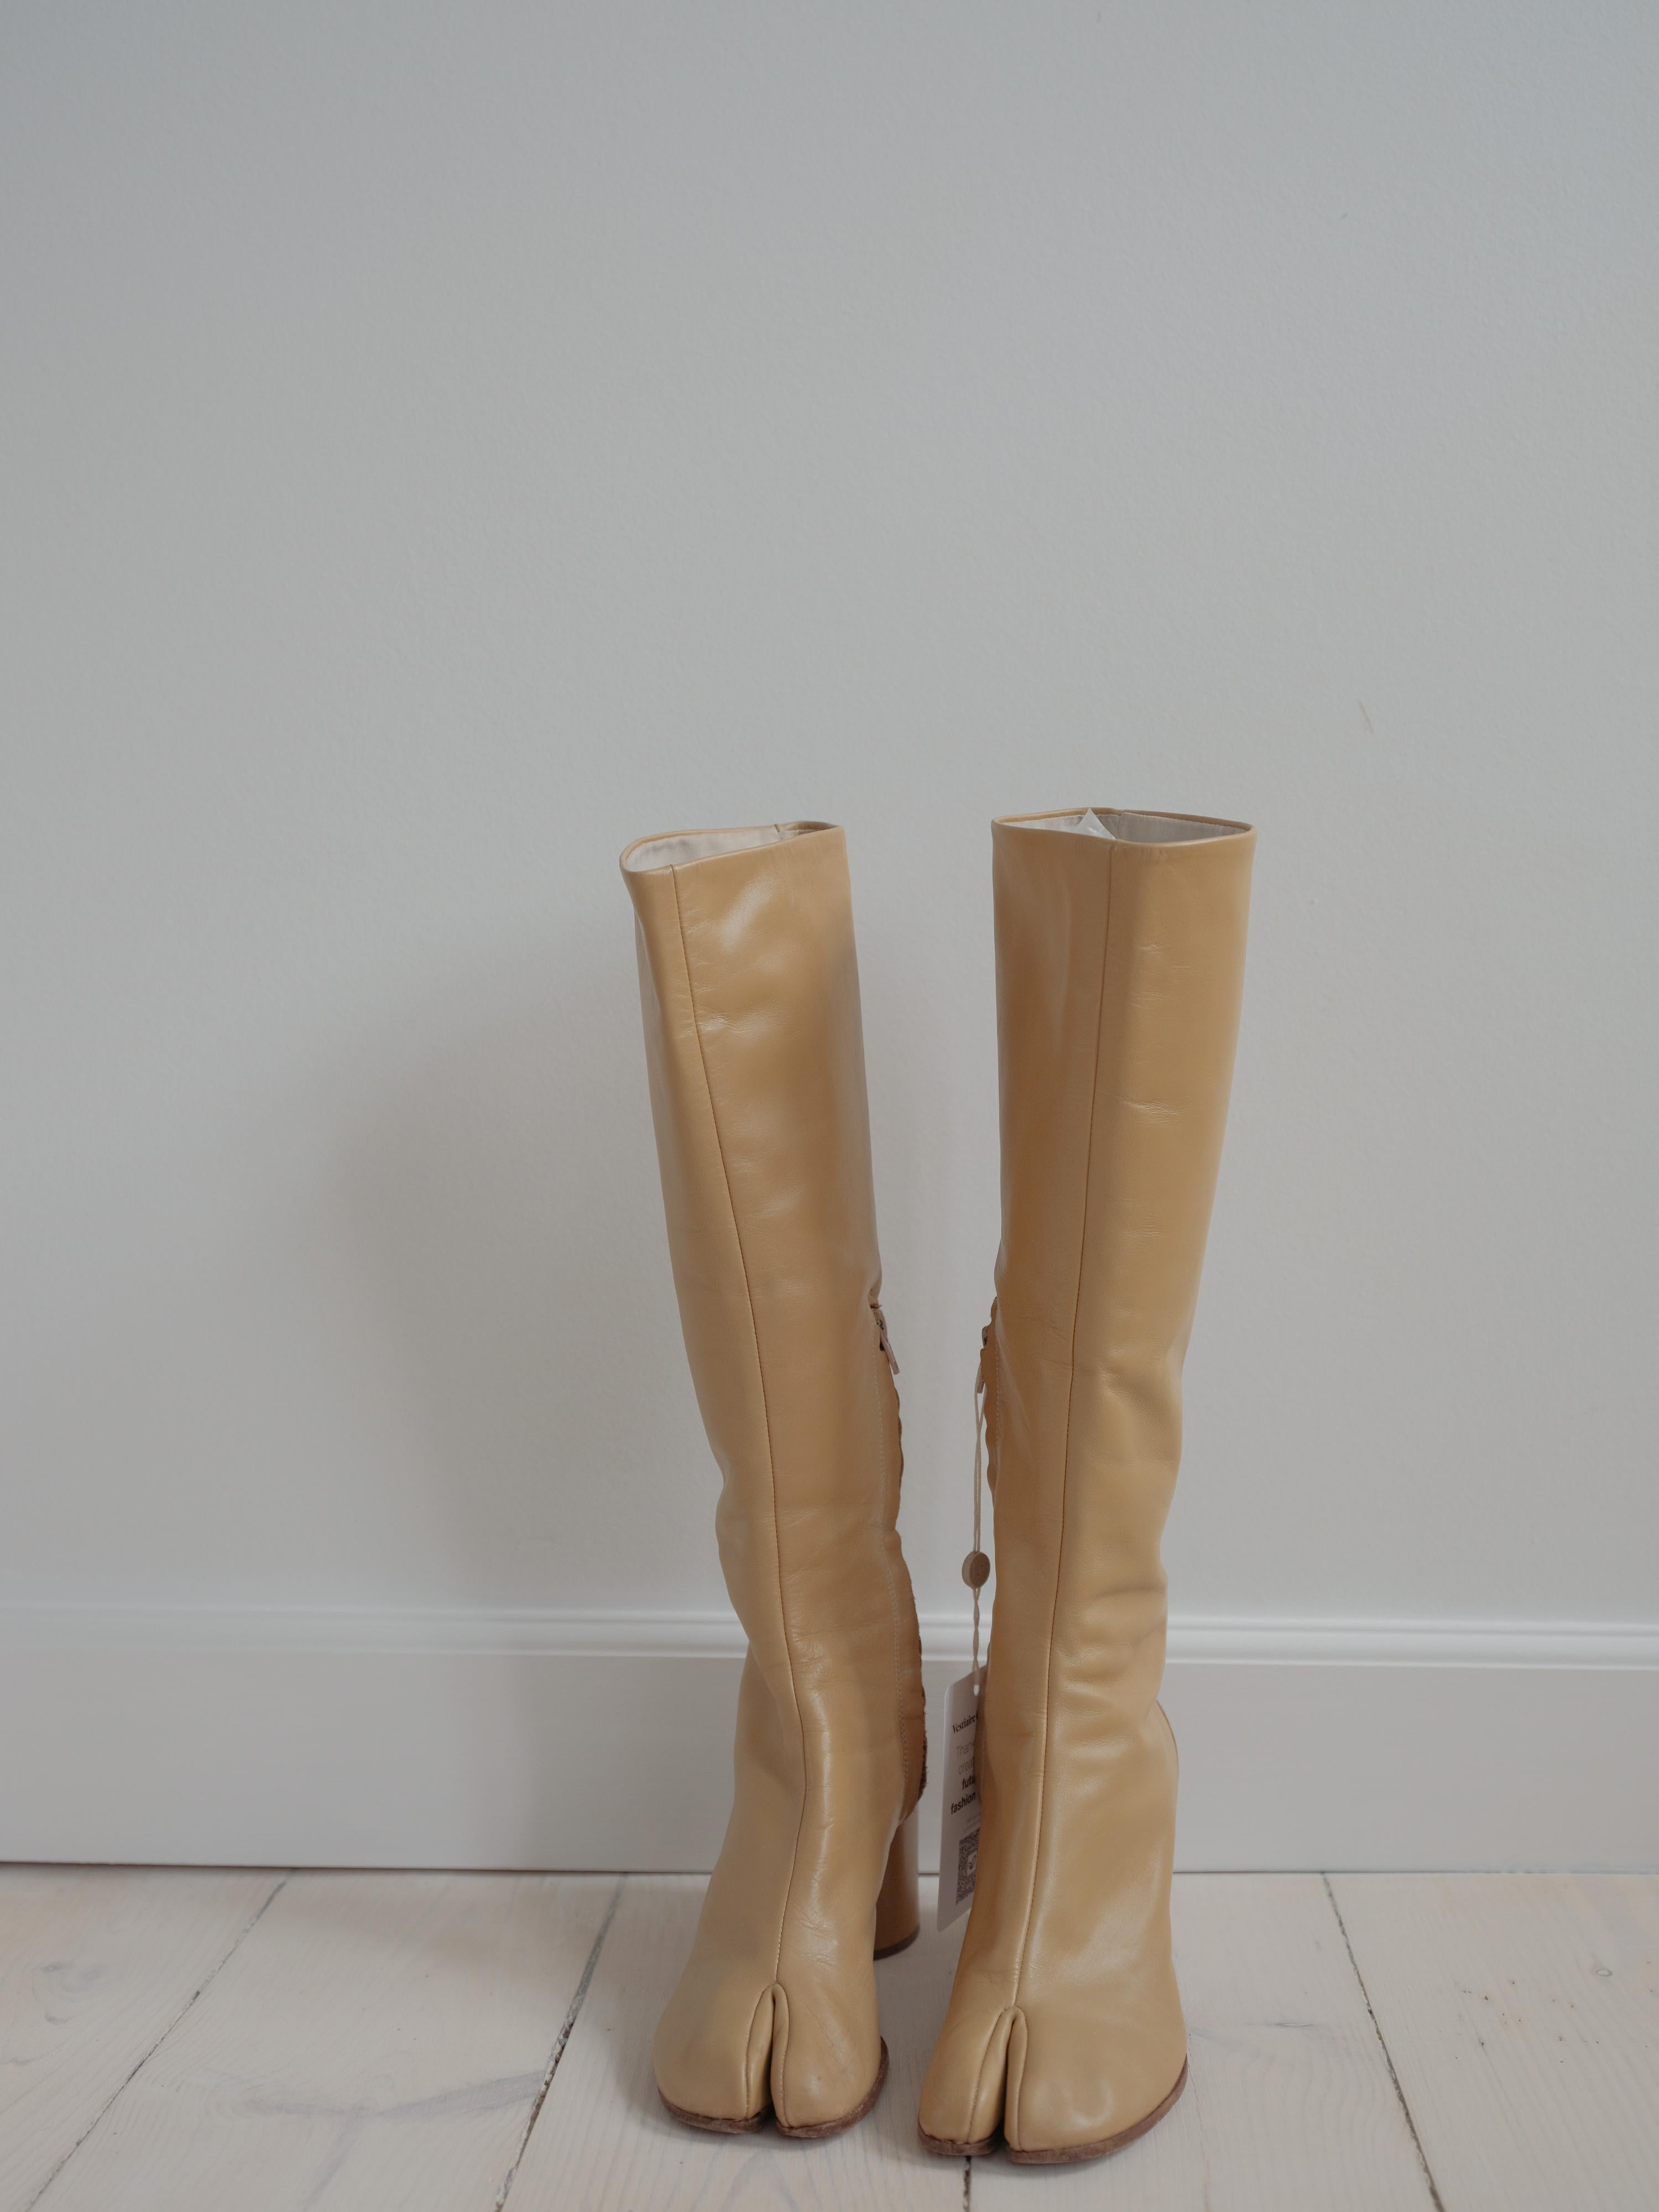 Margiela Tabi Knee High Boots 2004 look book collection  Beige  Leather  EU 38  For Sale 2